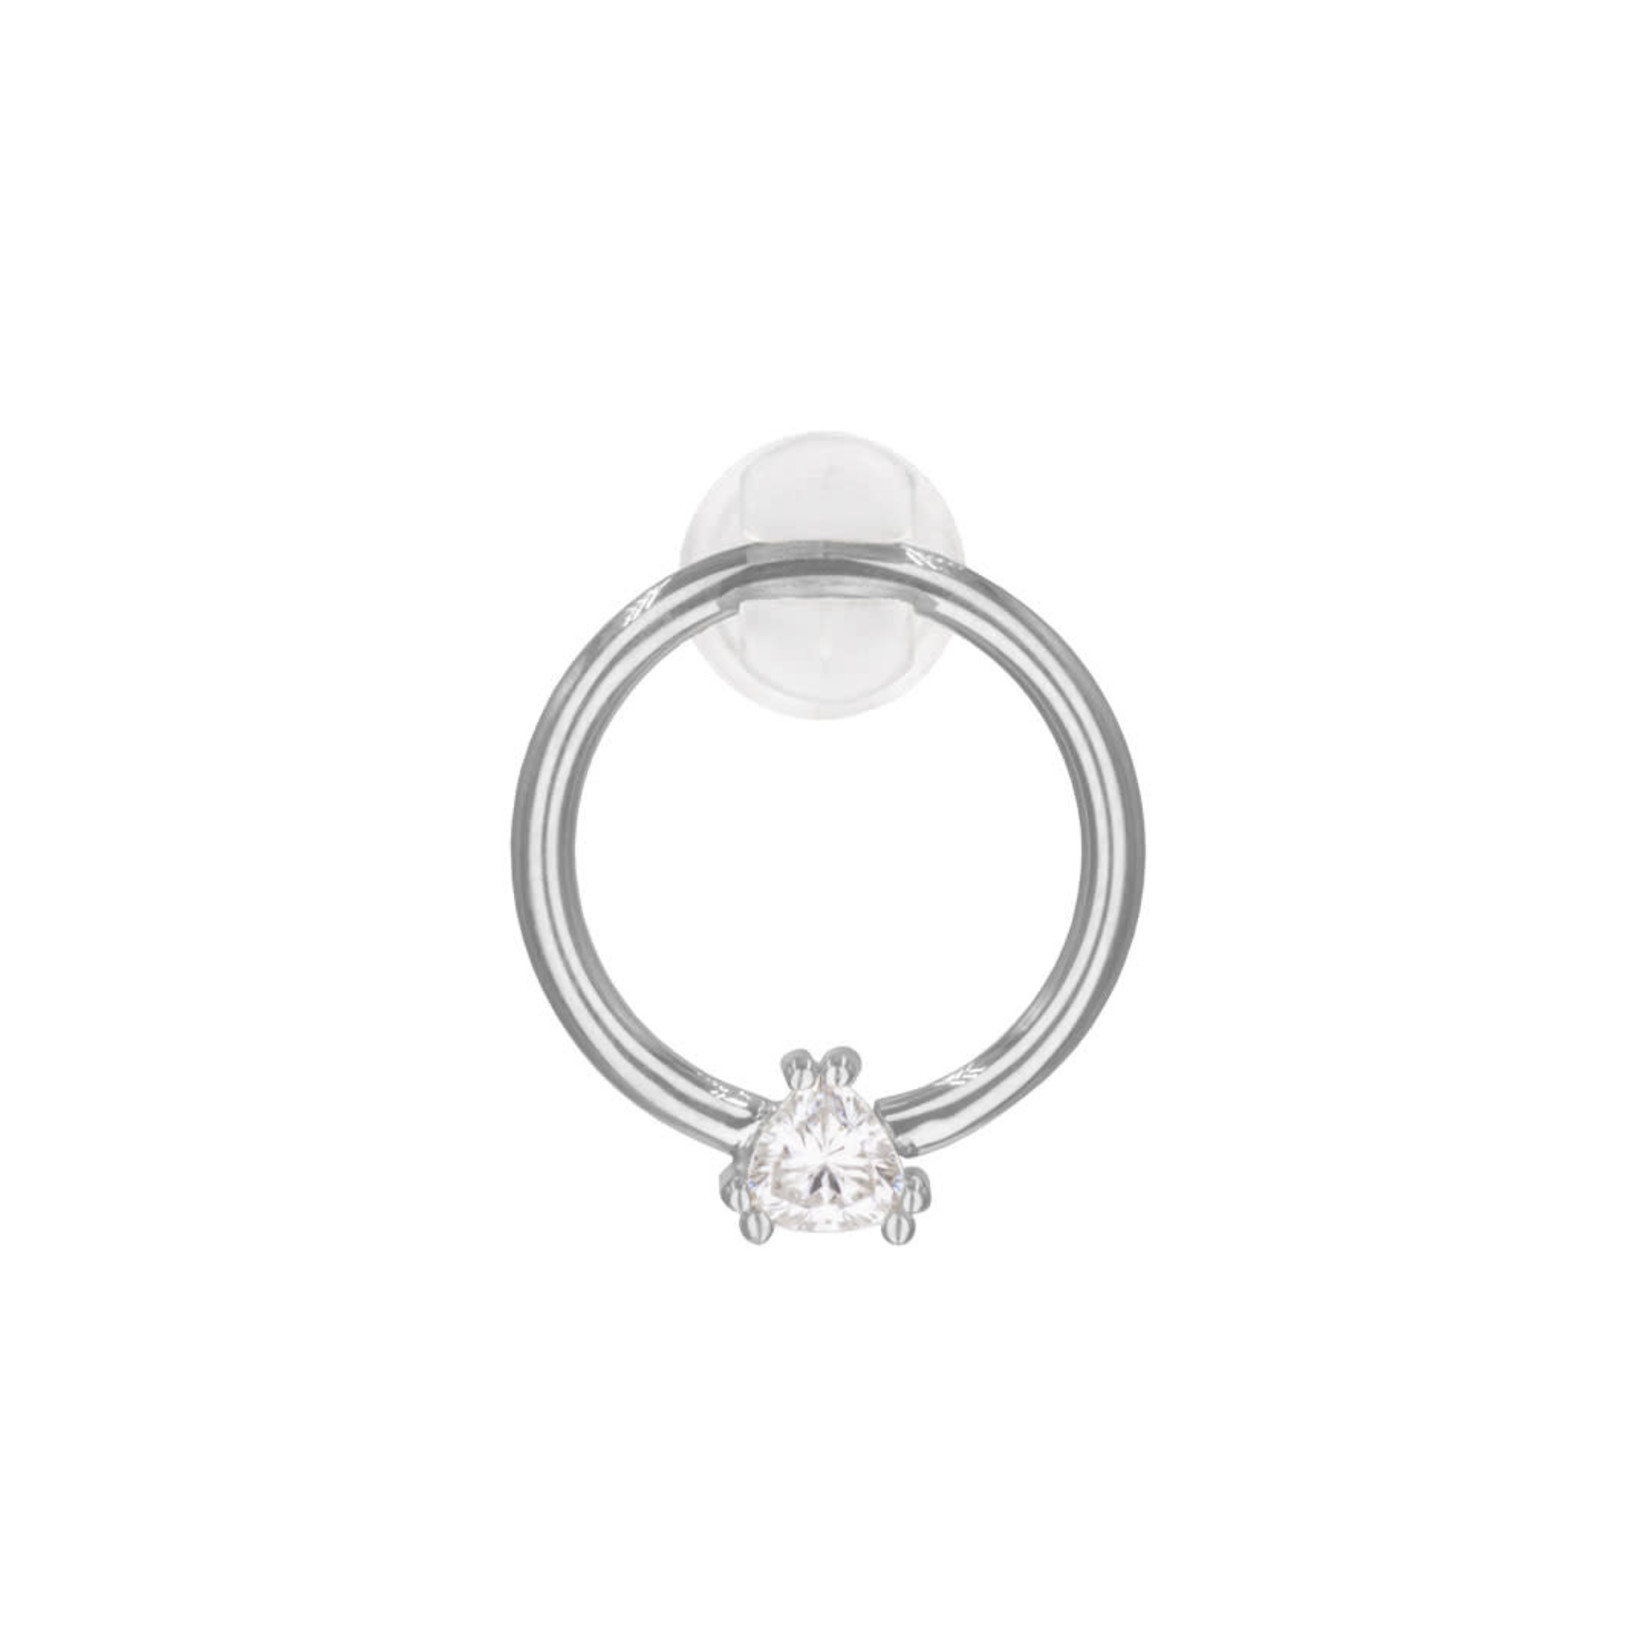 BVLA BVLA 16g "Tanti" fixed ring with 3.0 CZ trillion